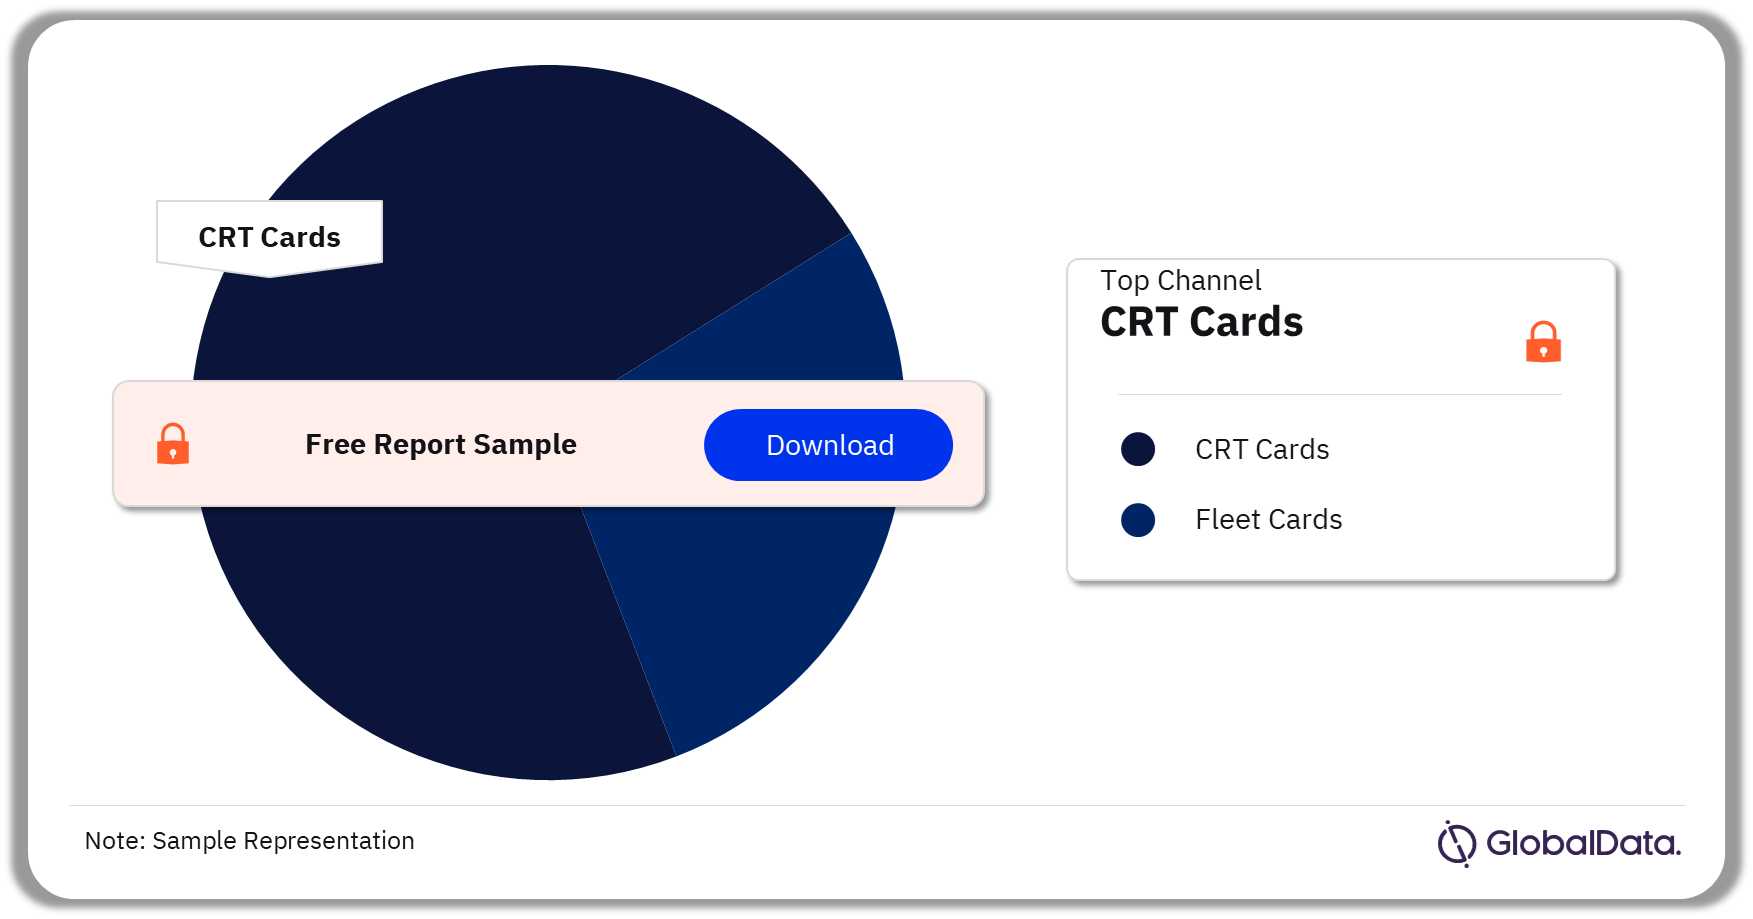 Luxembourg Fuel Cards Market Analysis by Channels, 2022 (%)